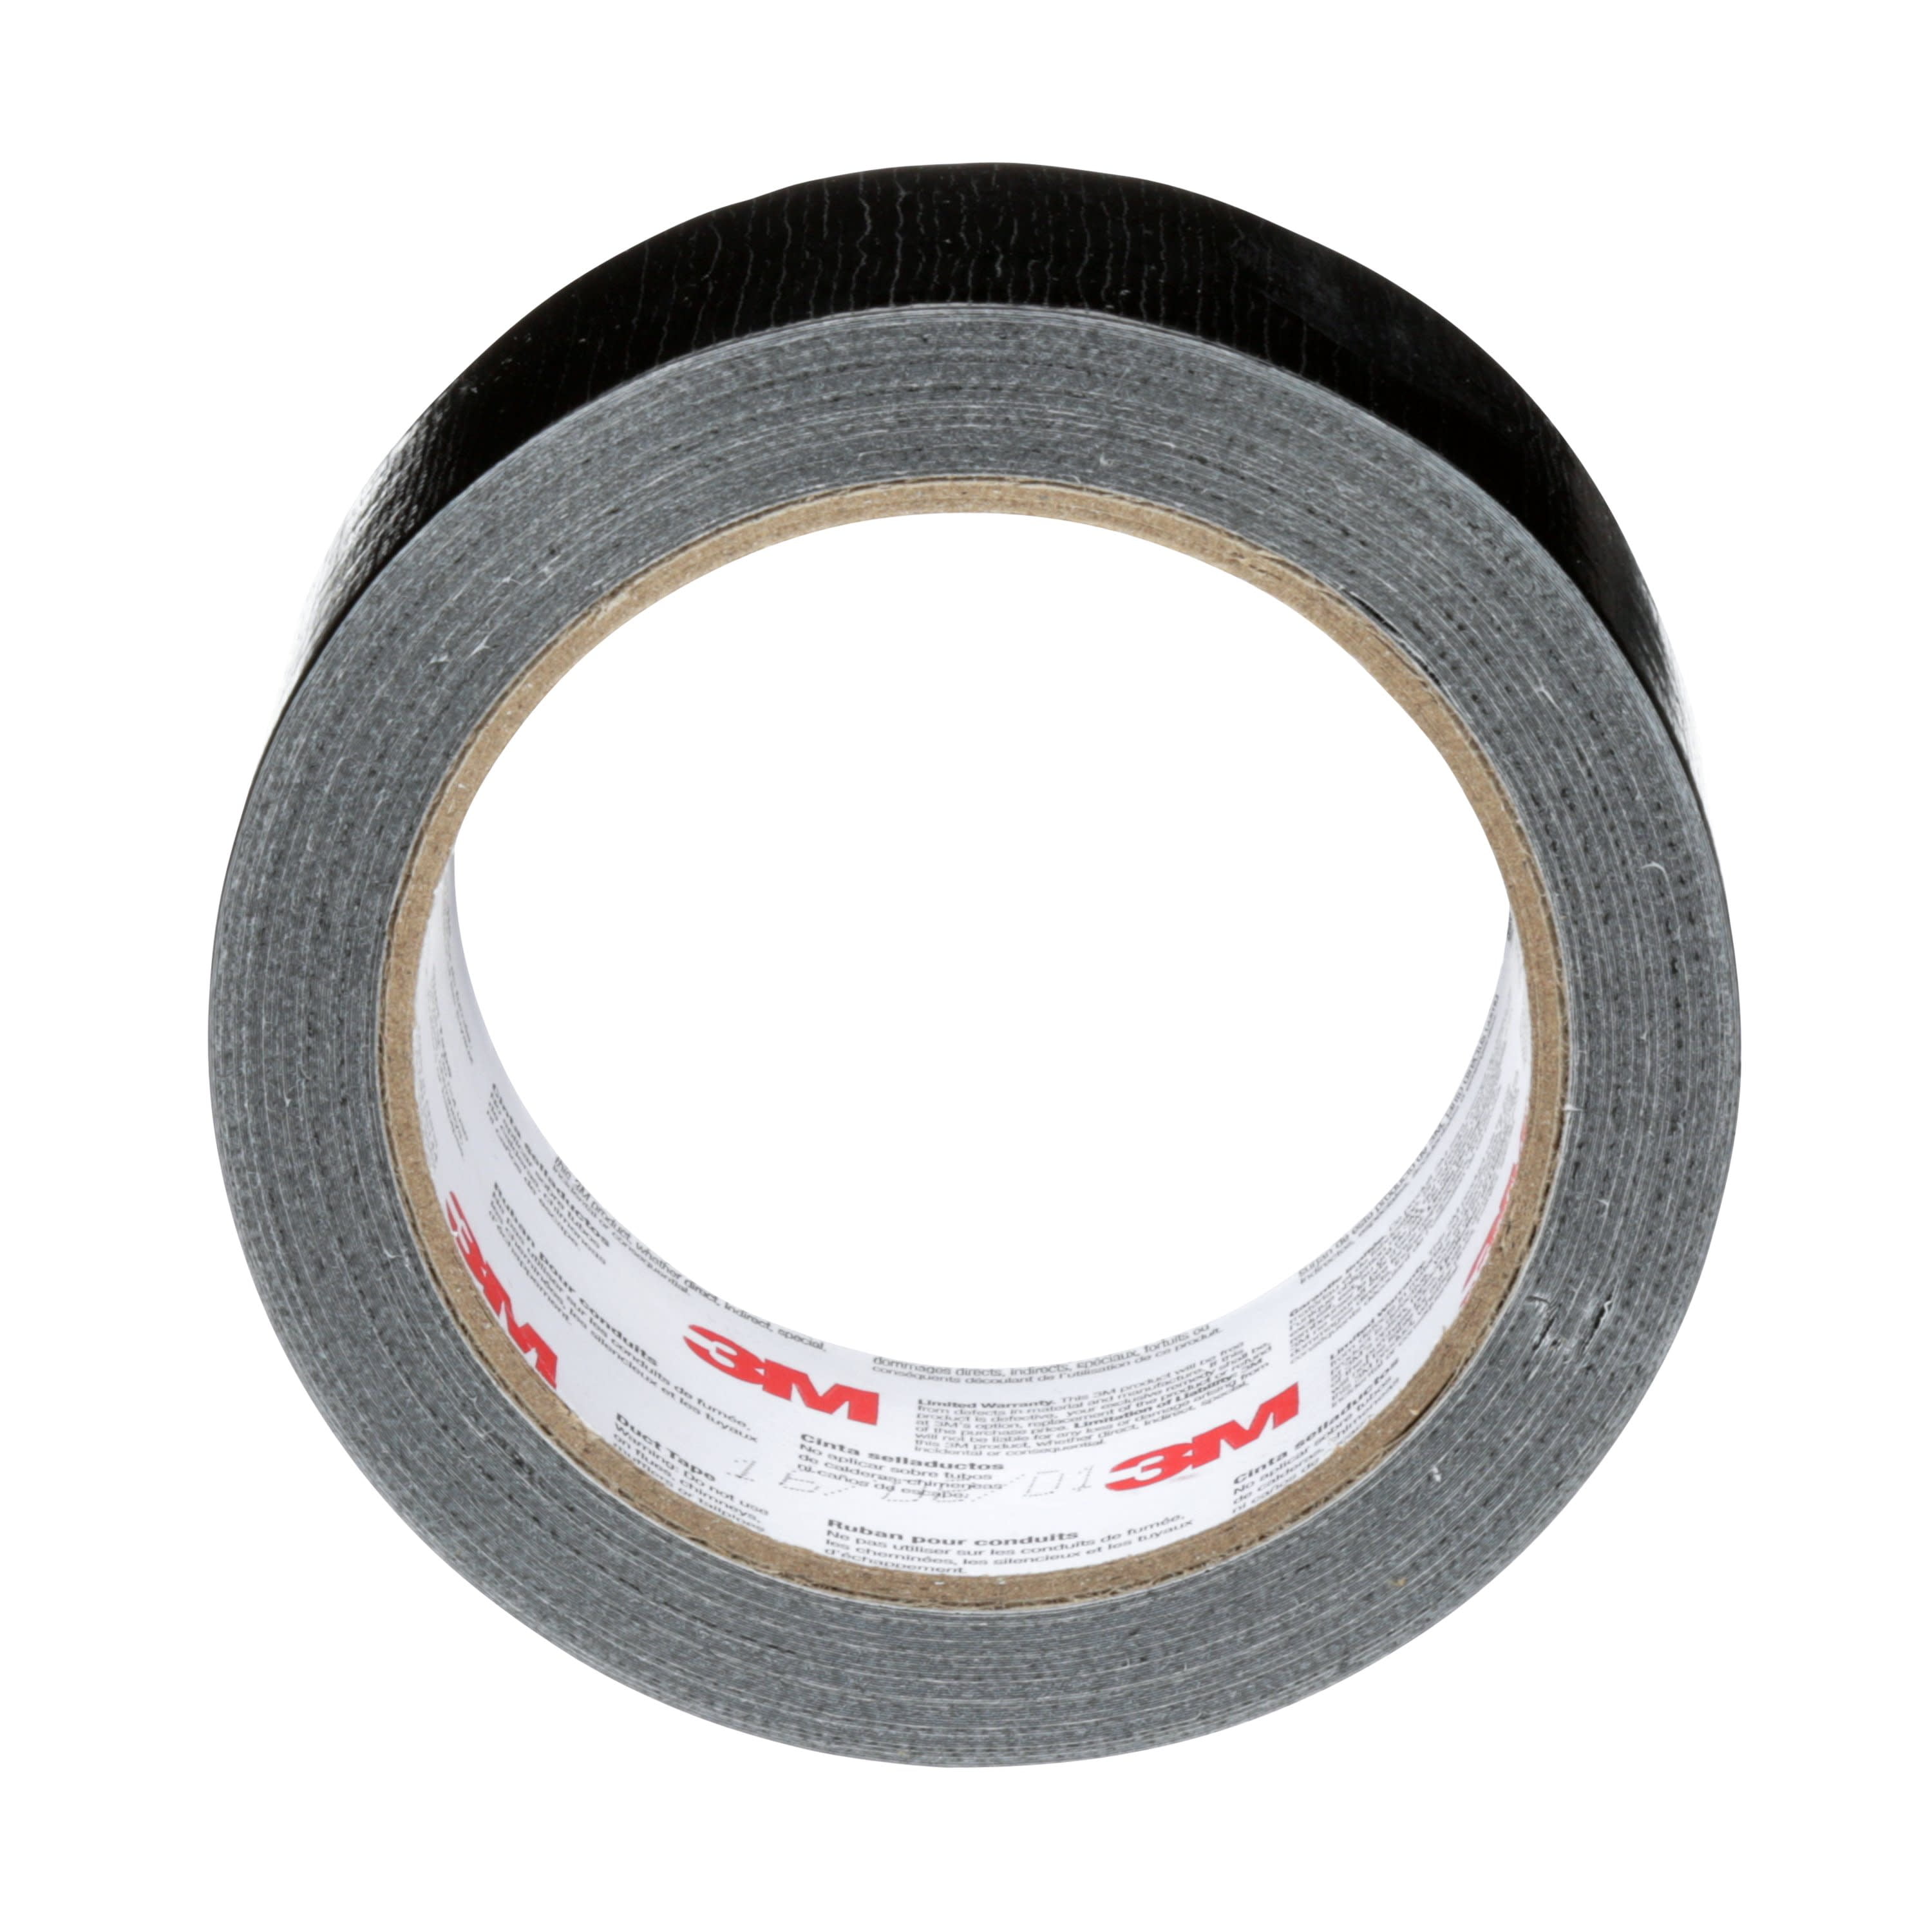 3M™ Value Duct Tape 1900, Silver, 1.88 in x 50 yd, 5.8 mil, 24 per case,  Individually Wrapped Conveniently Packaged